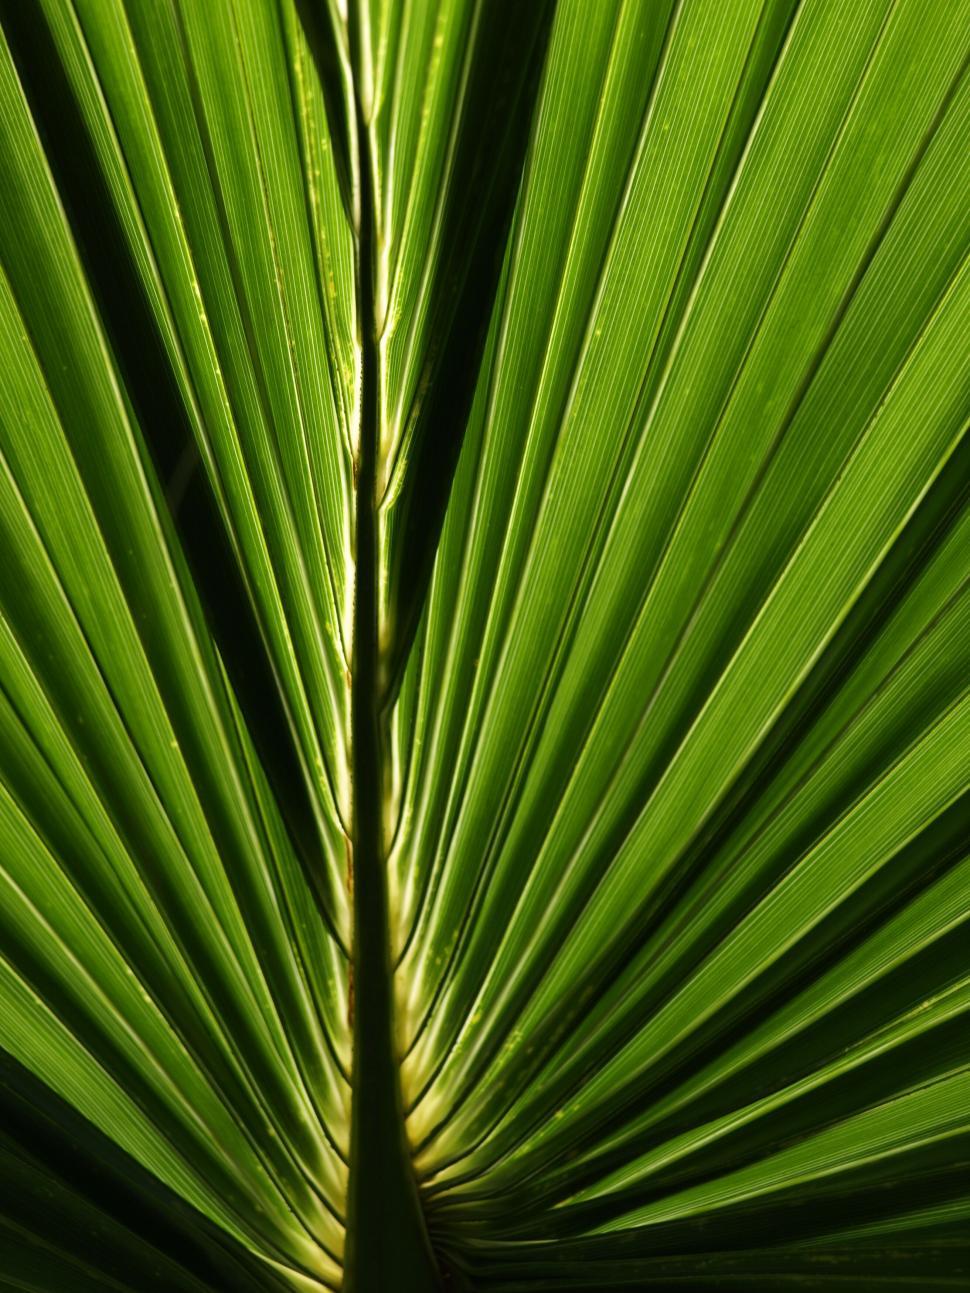 Free Image of Palm leaf texture in detailed close-up 